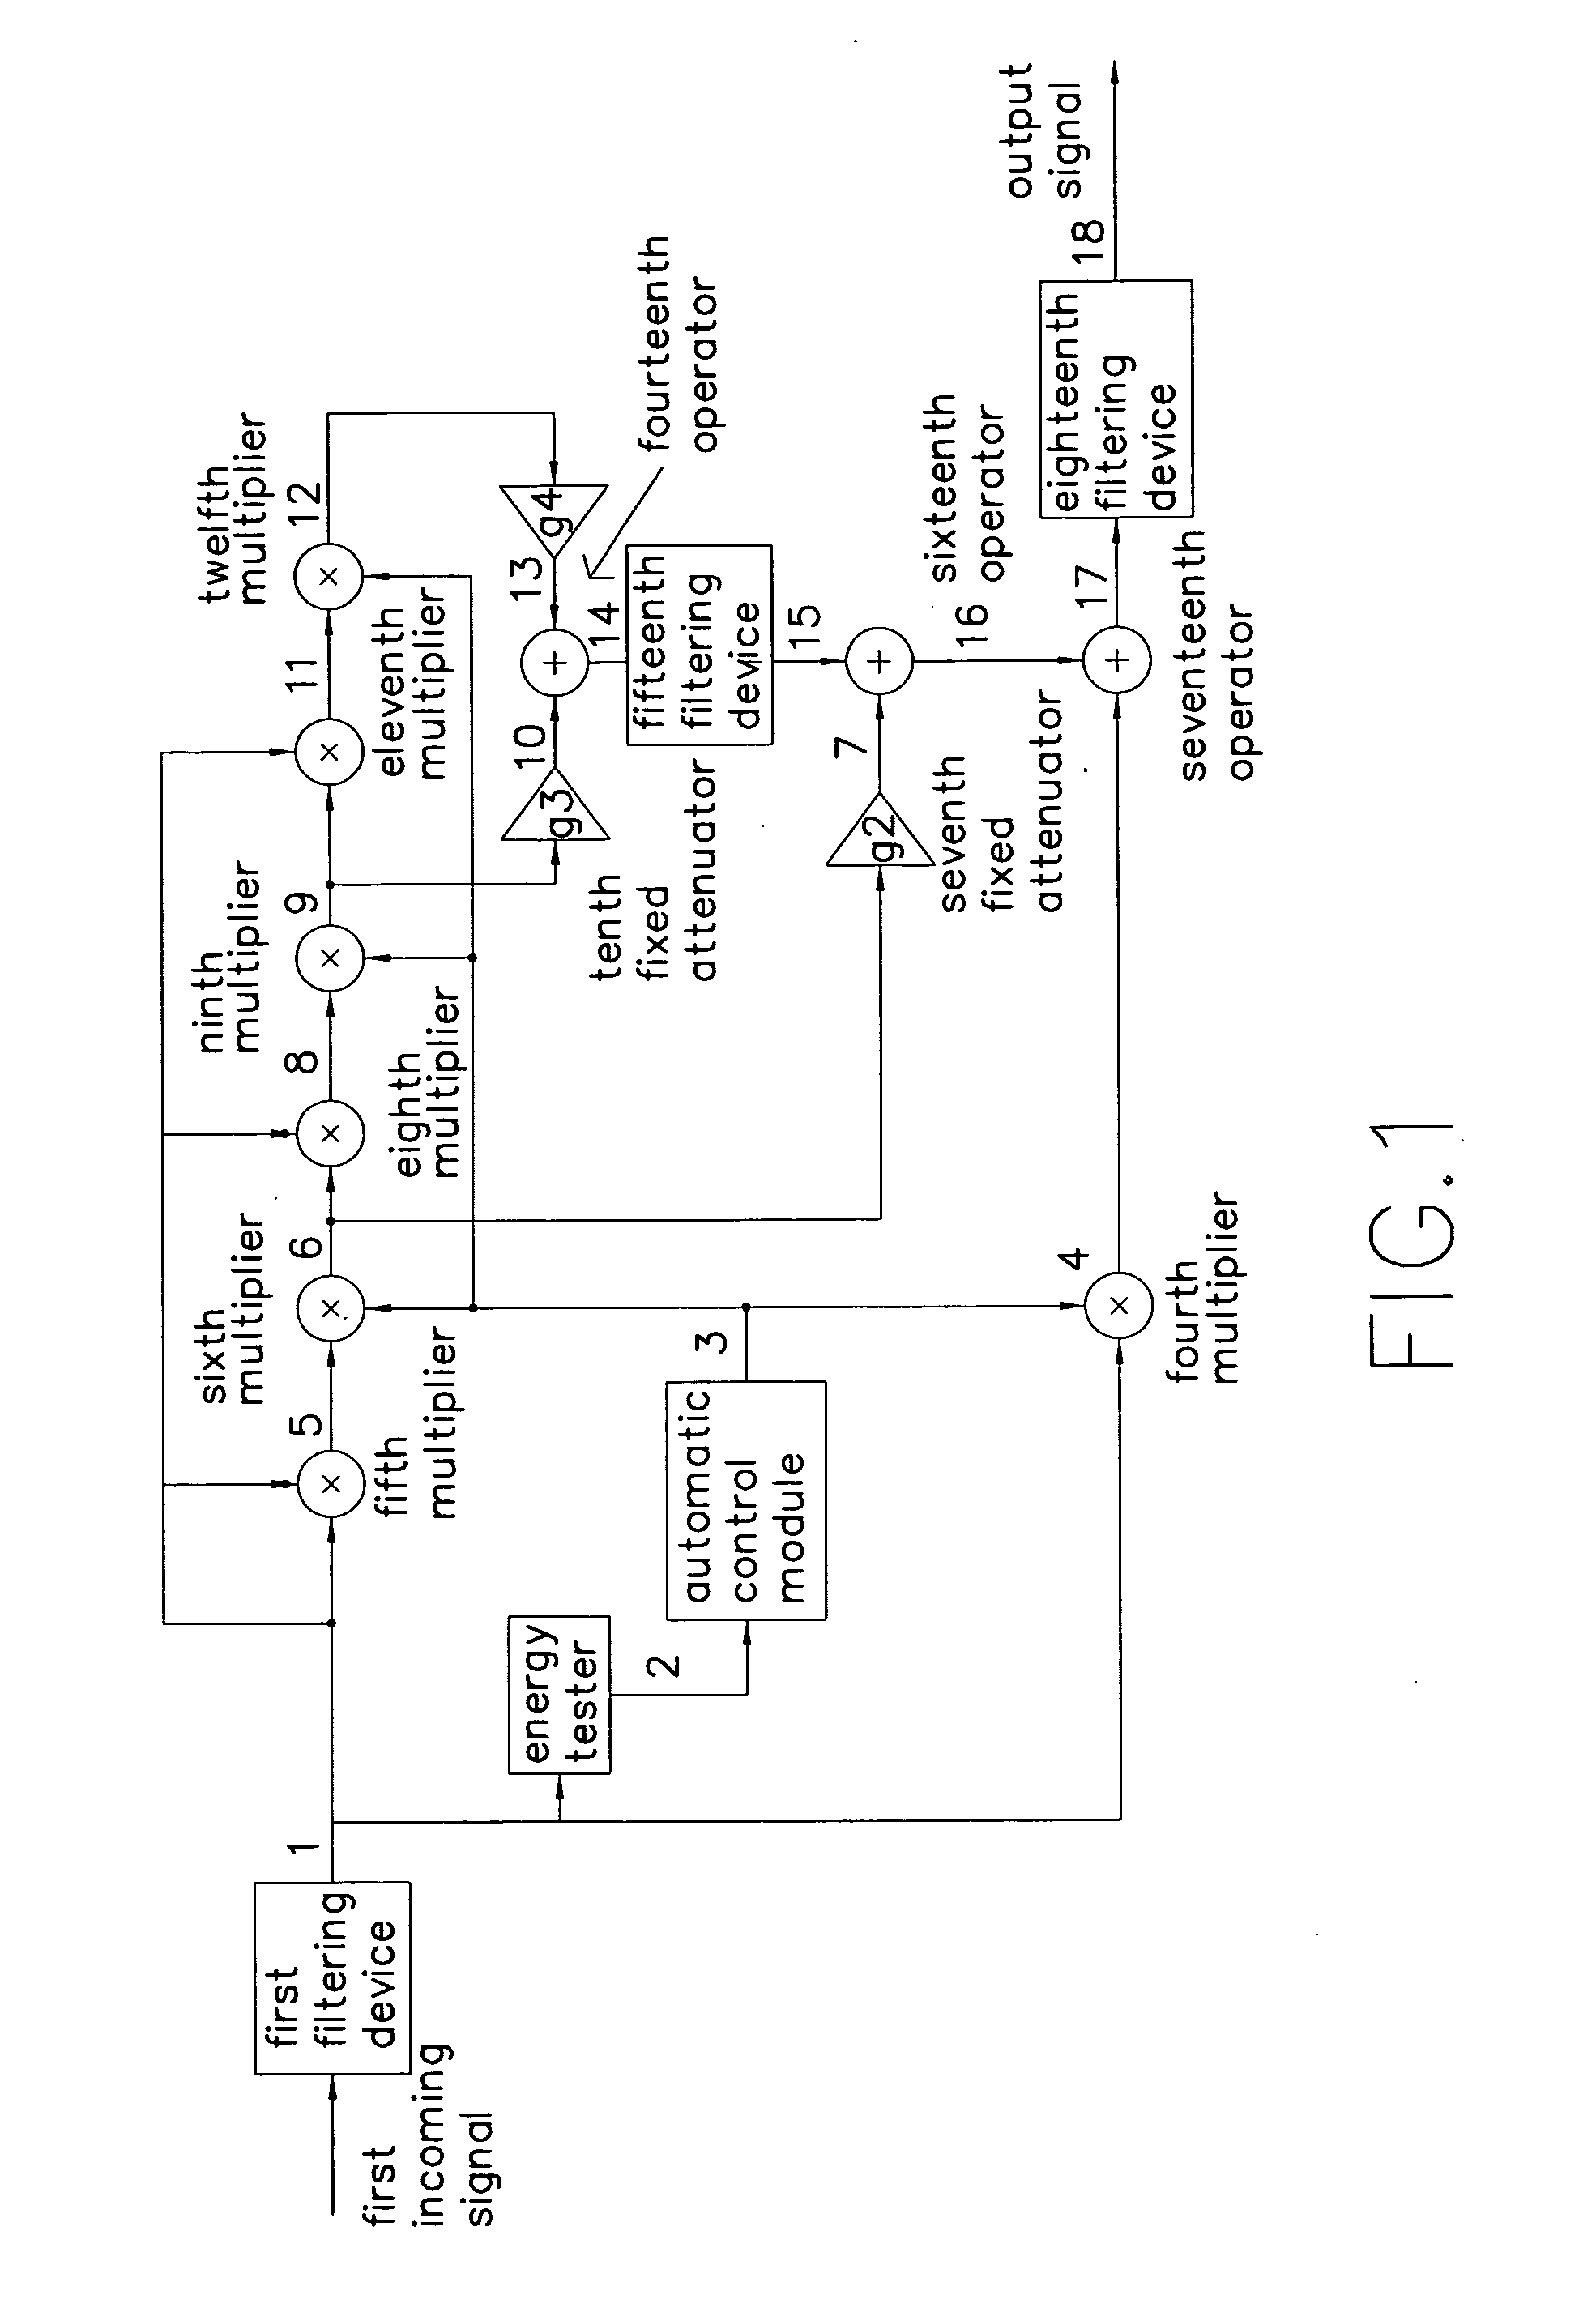 Process of implementing low frequency of audio signal